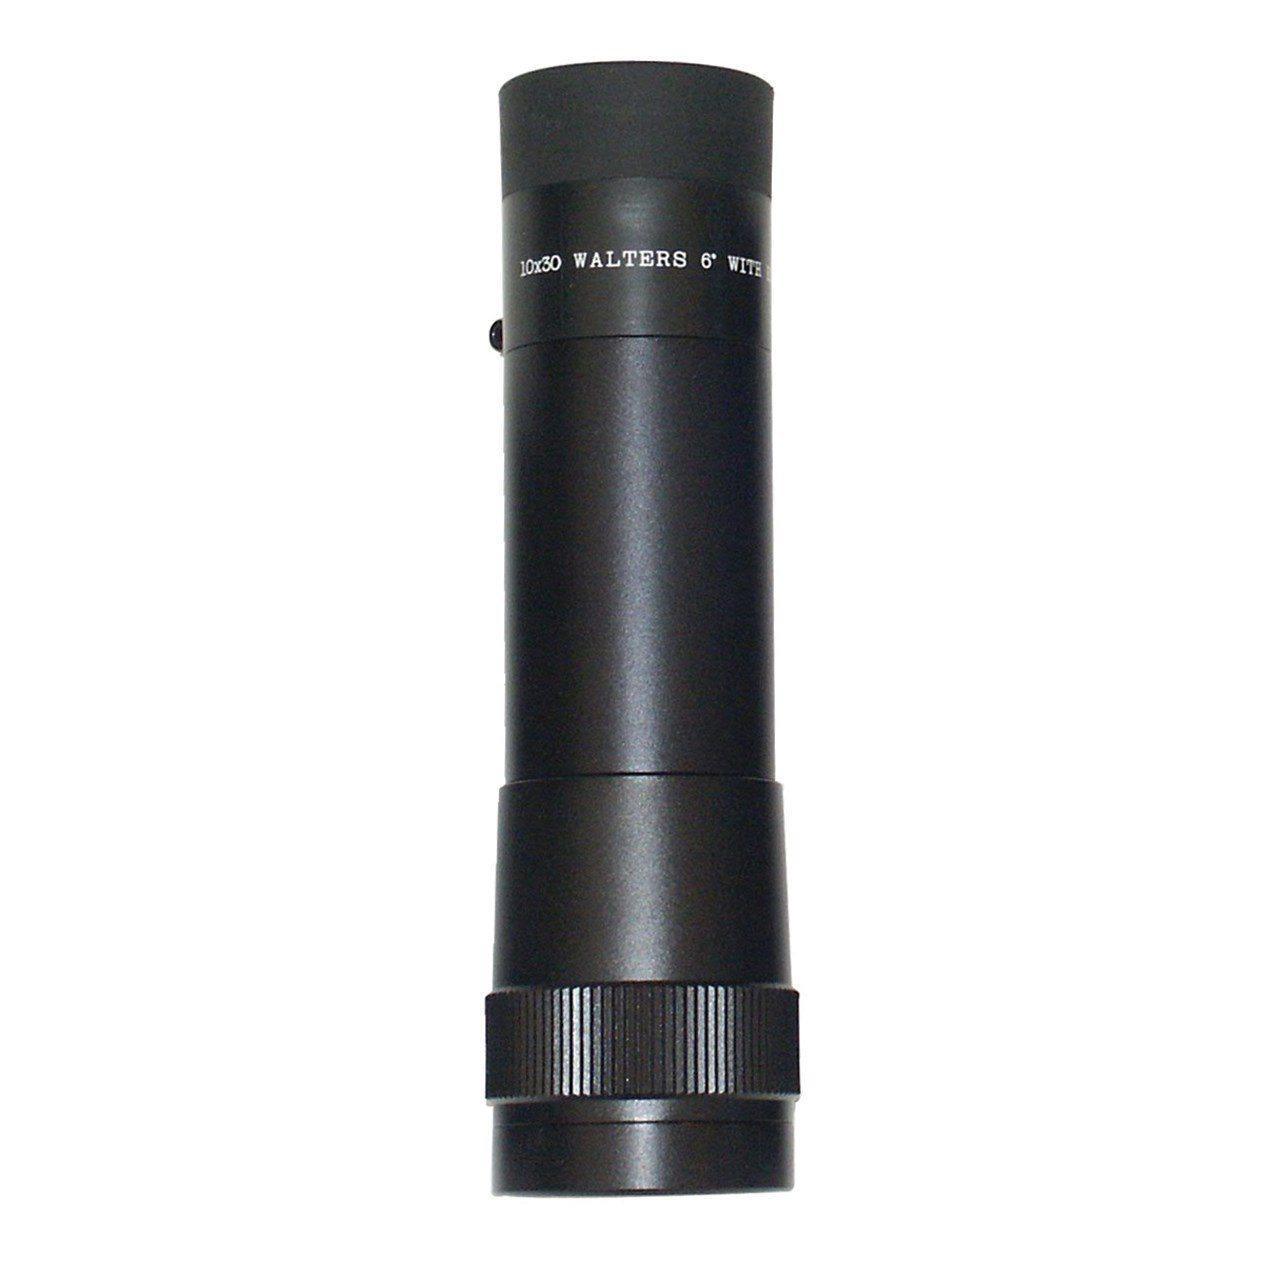 Walters Low Vision 10x30 Monocular - The Low Vision Store